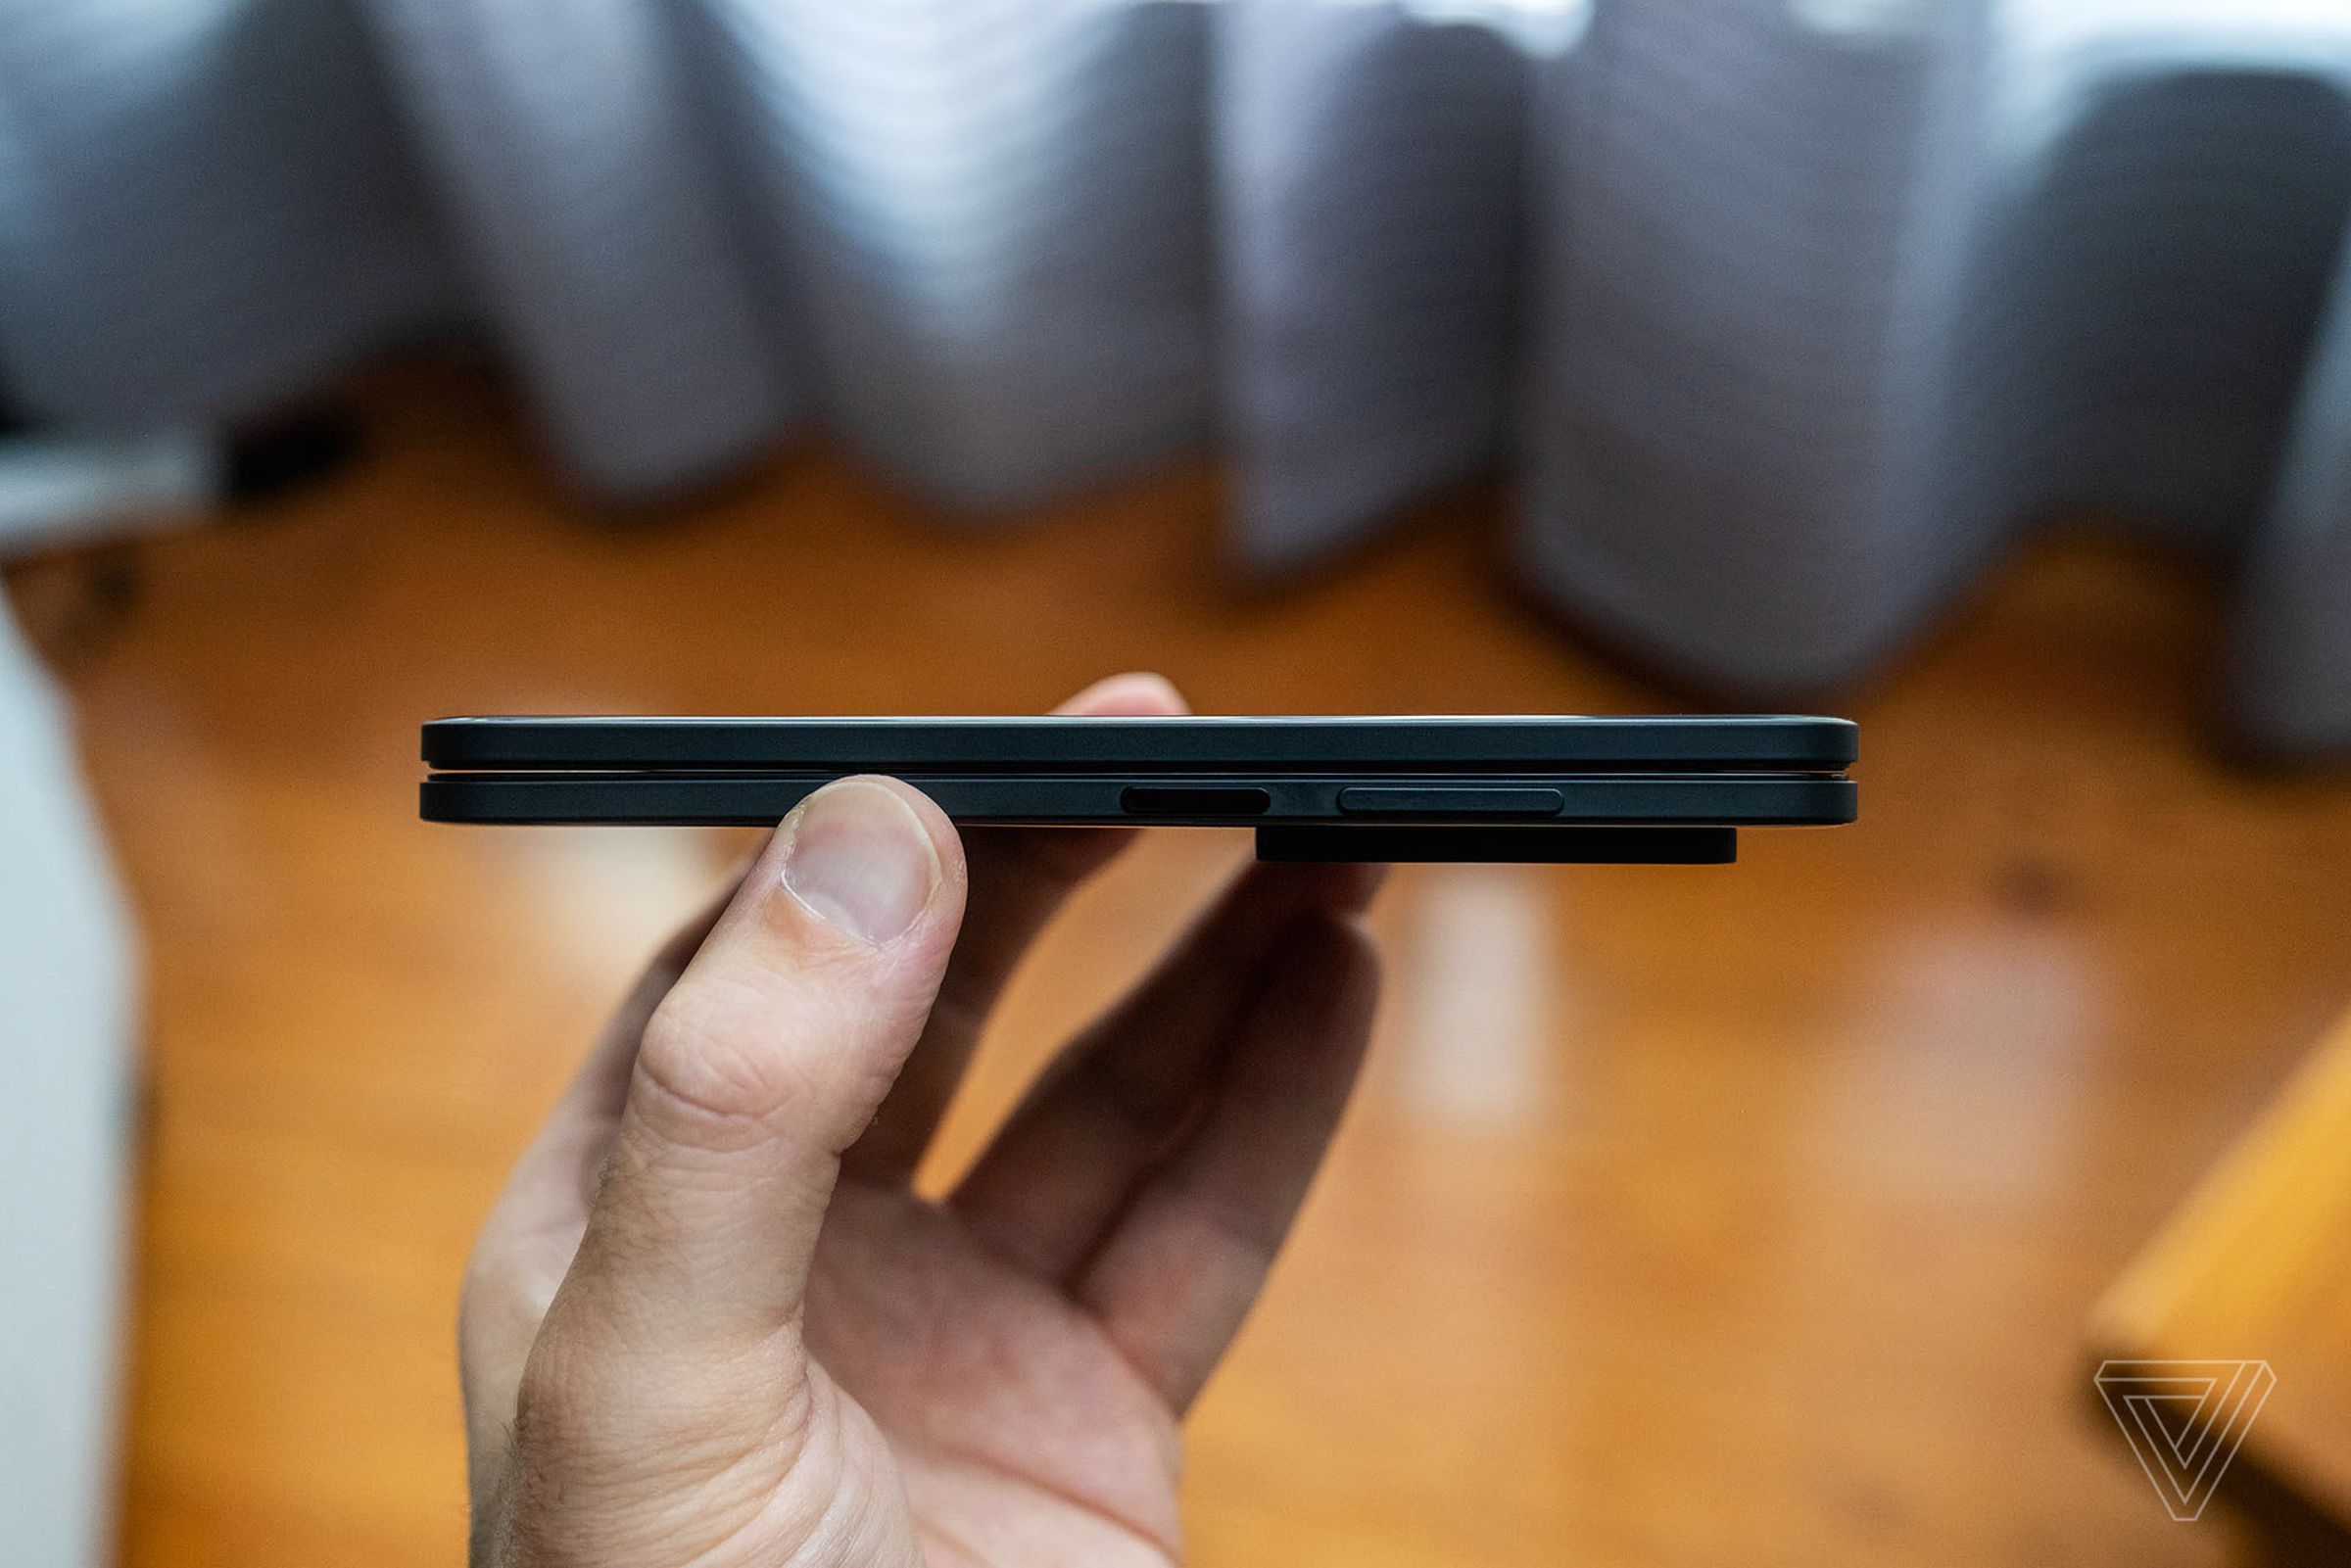 The Duo 2 is slightly thicker than last year’s model, but it’s still impressively thin when closed.